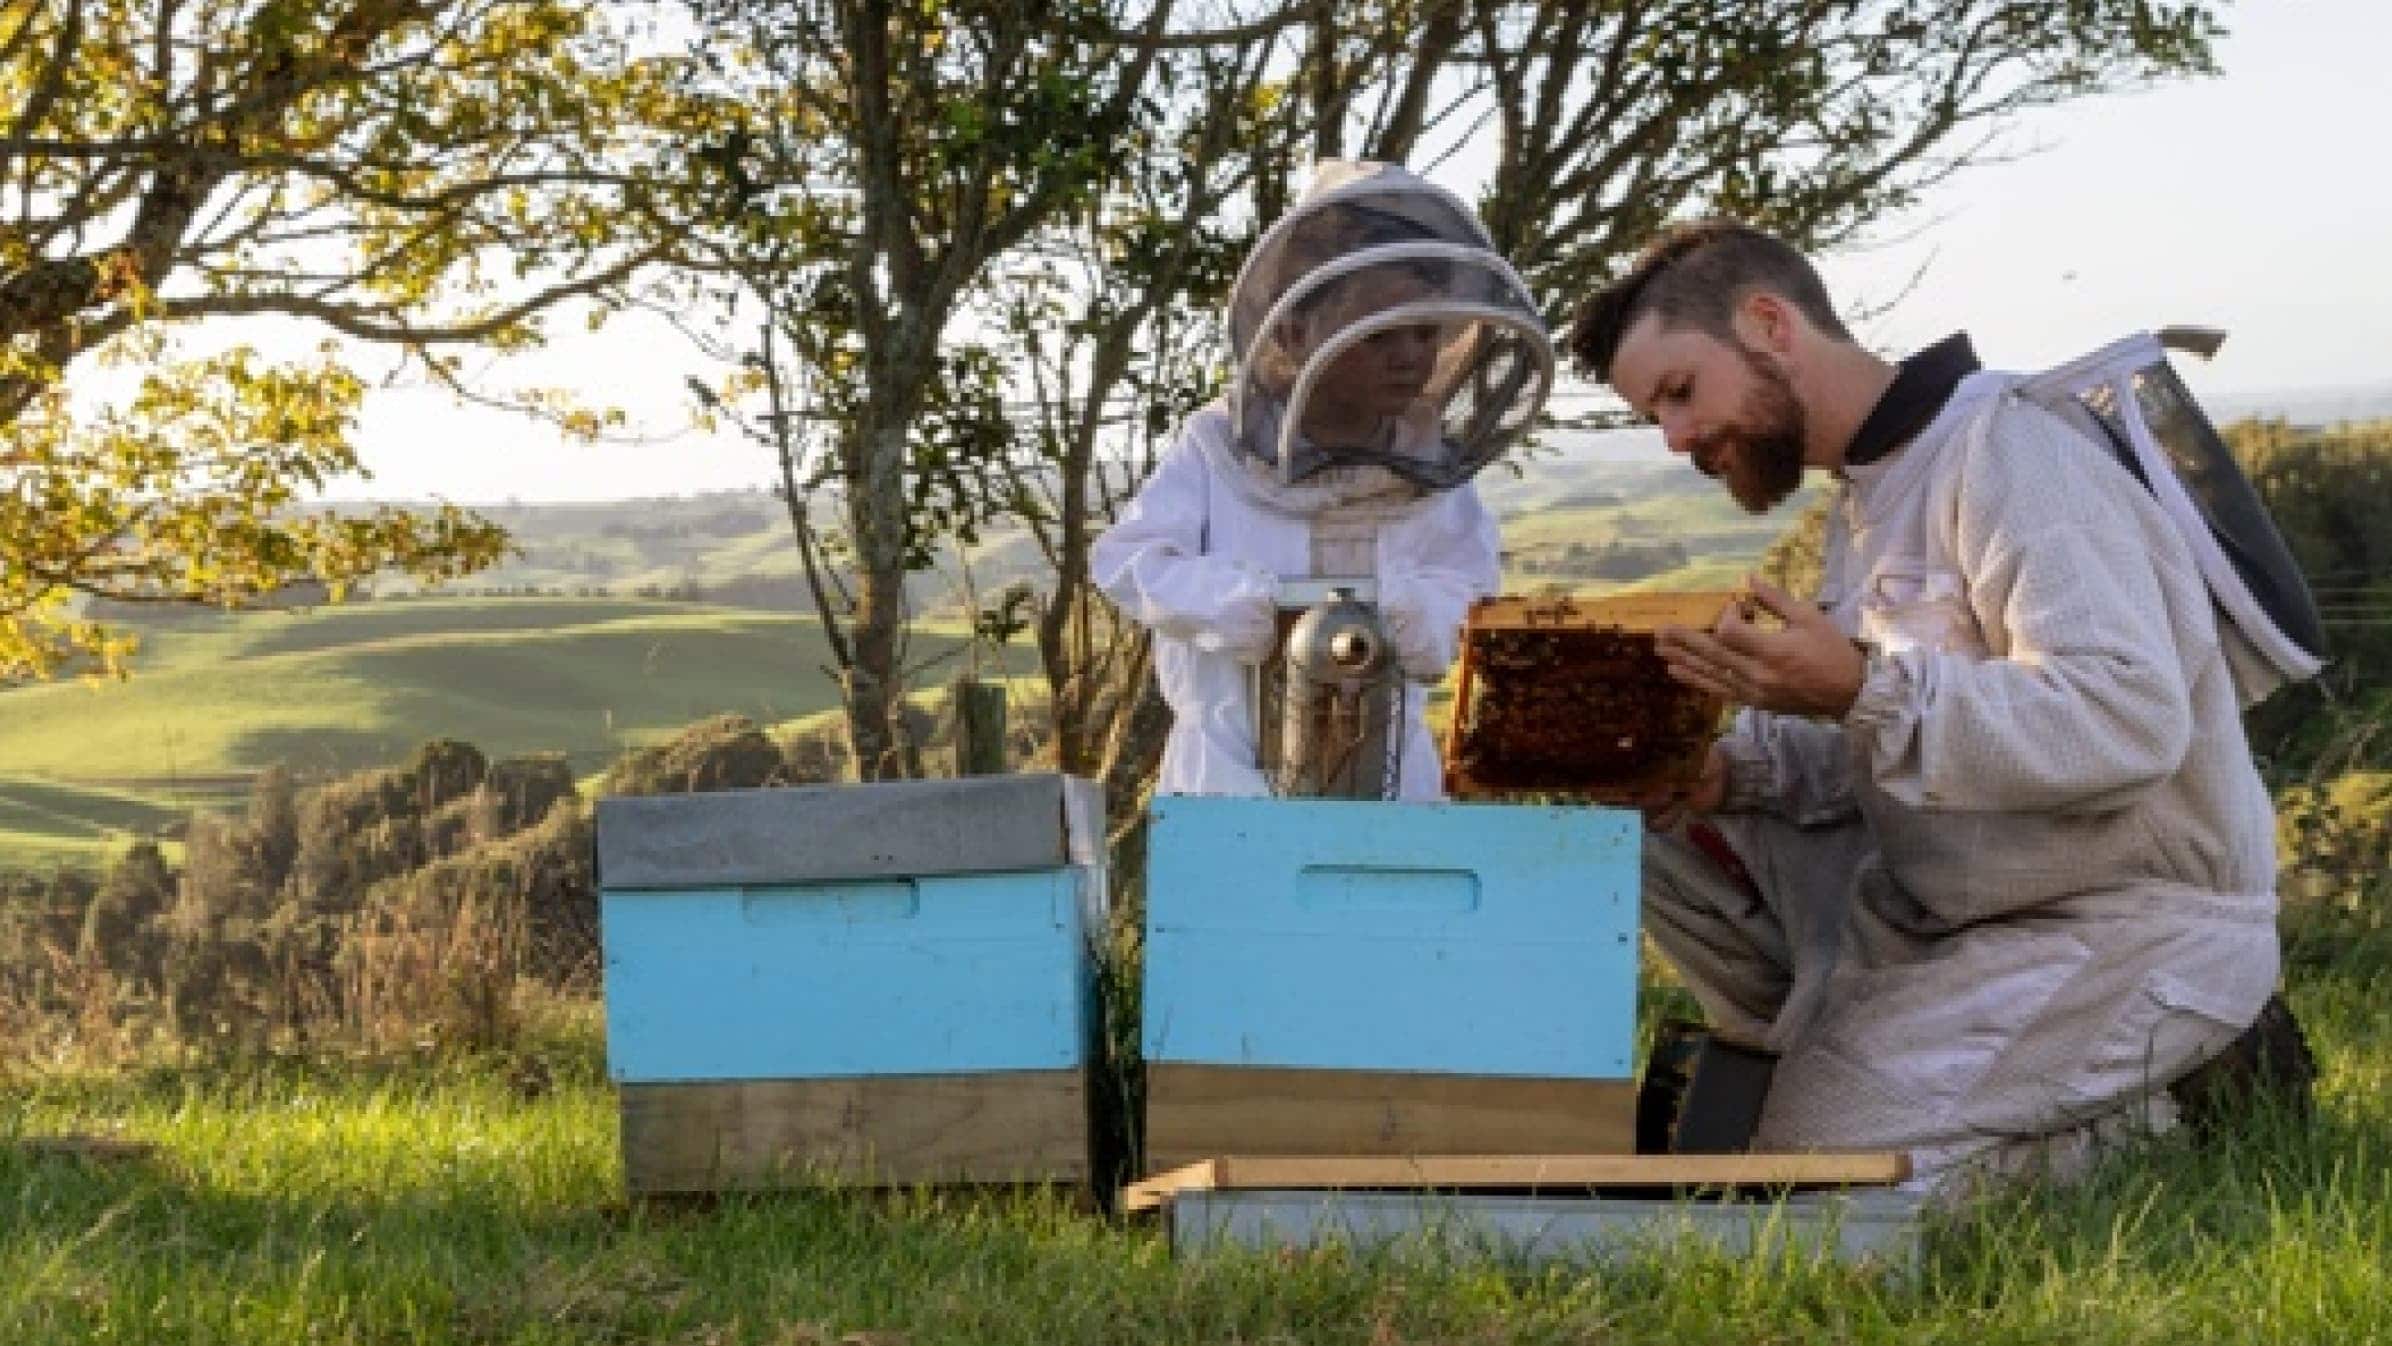 Rory O’Brien with his young son wearing protective suits while looking at their bee hives.